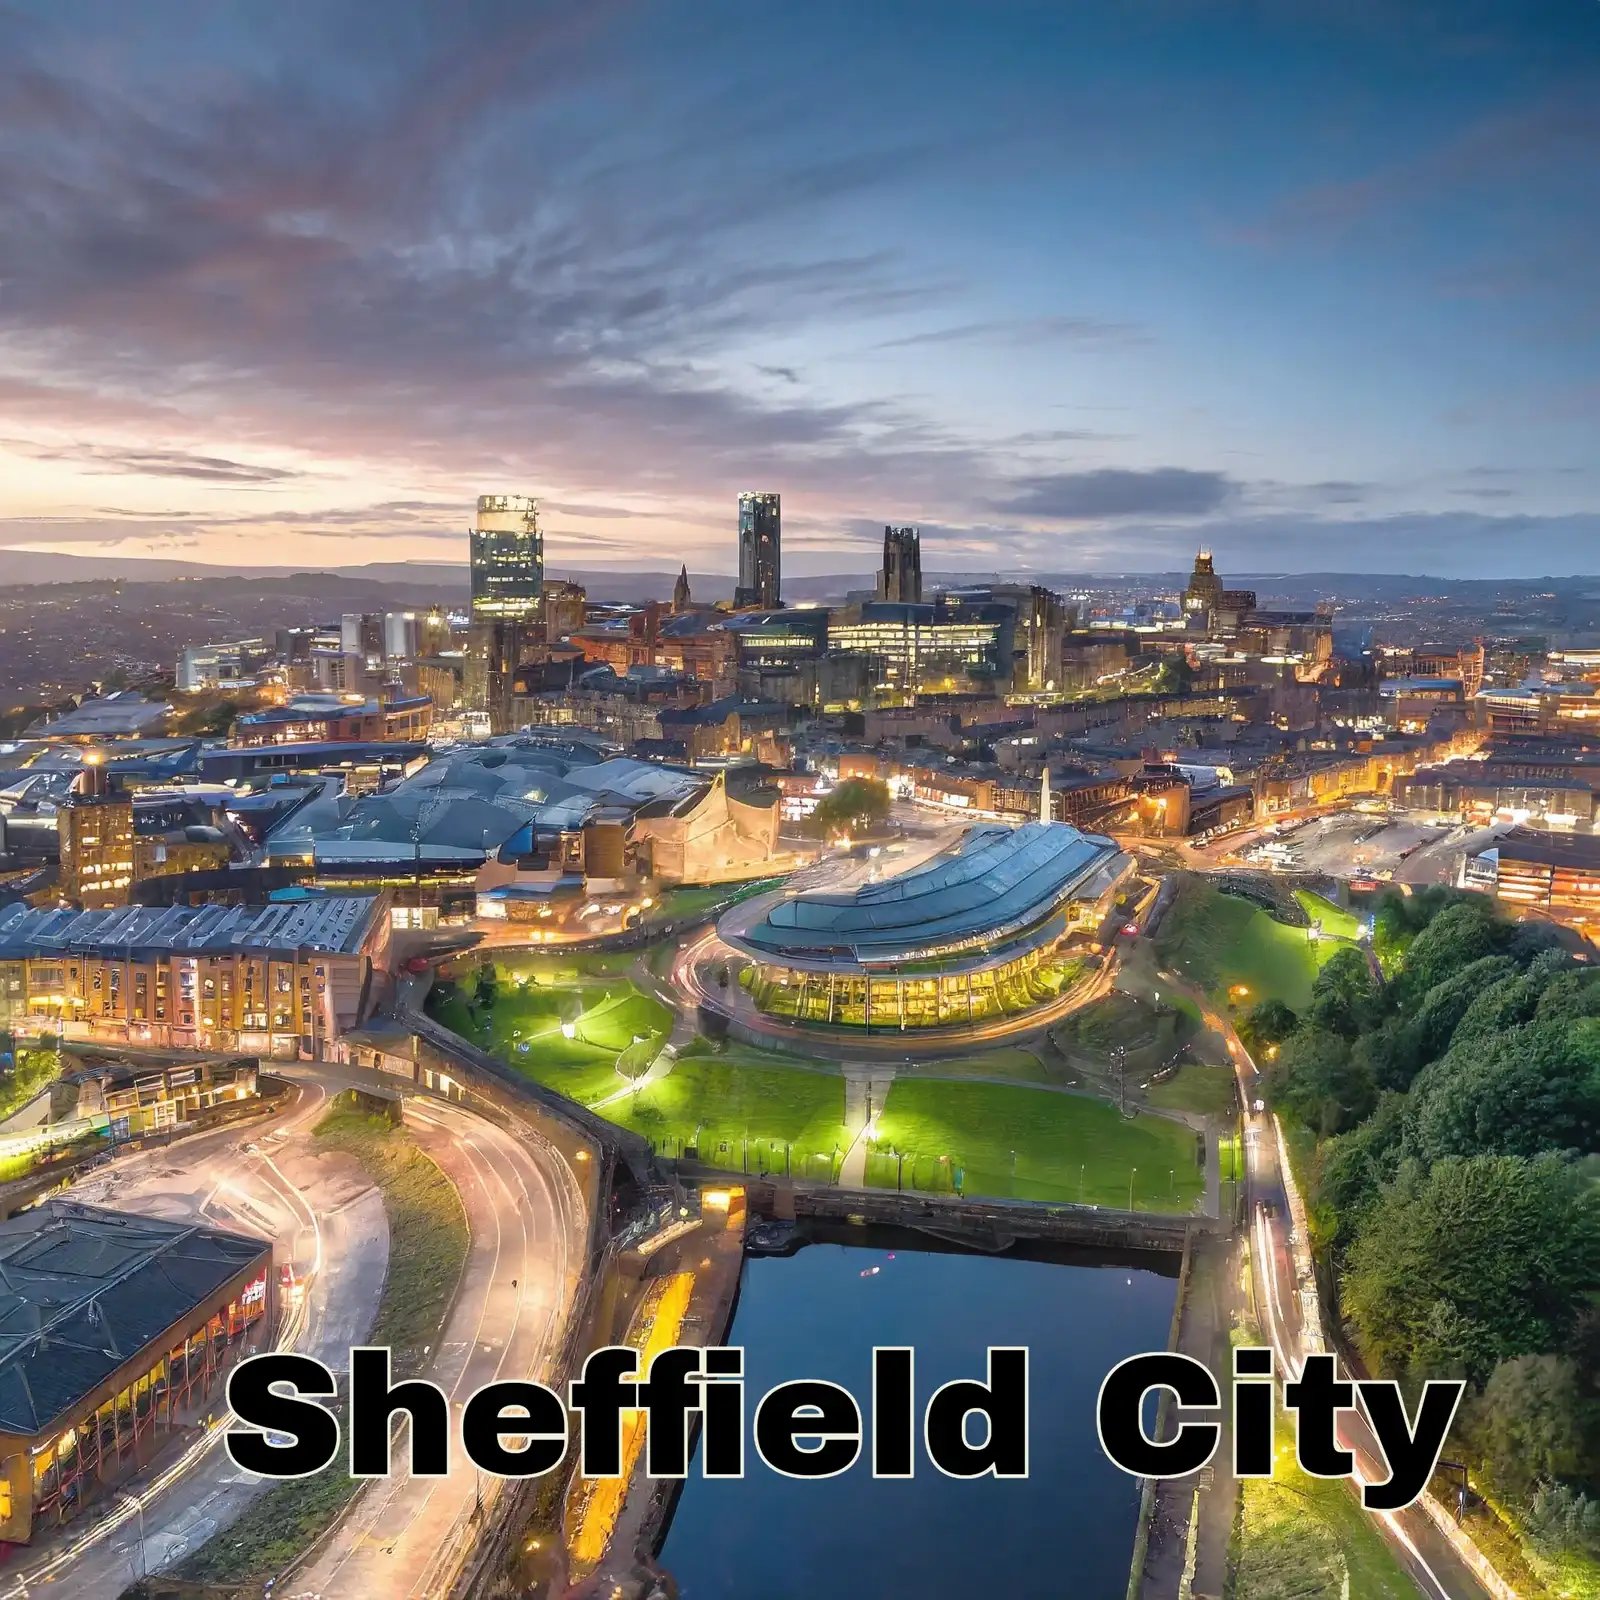 Twilight view of Sheffield City with illuminated buildings and winding roads.